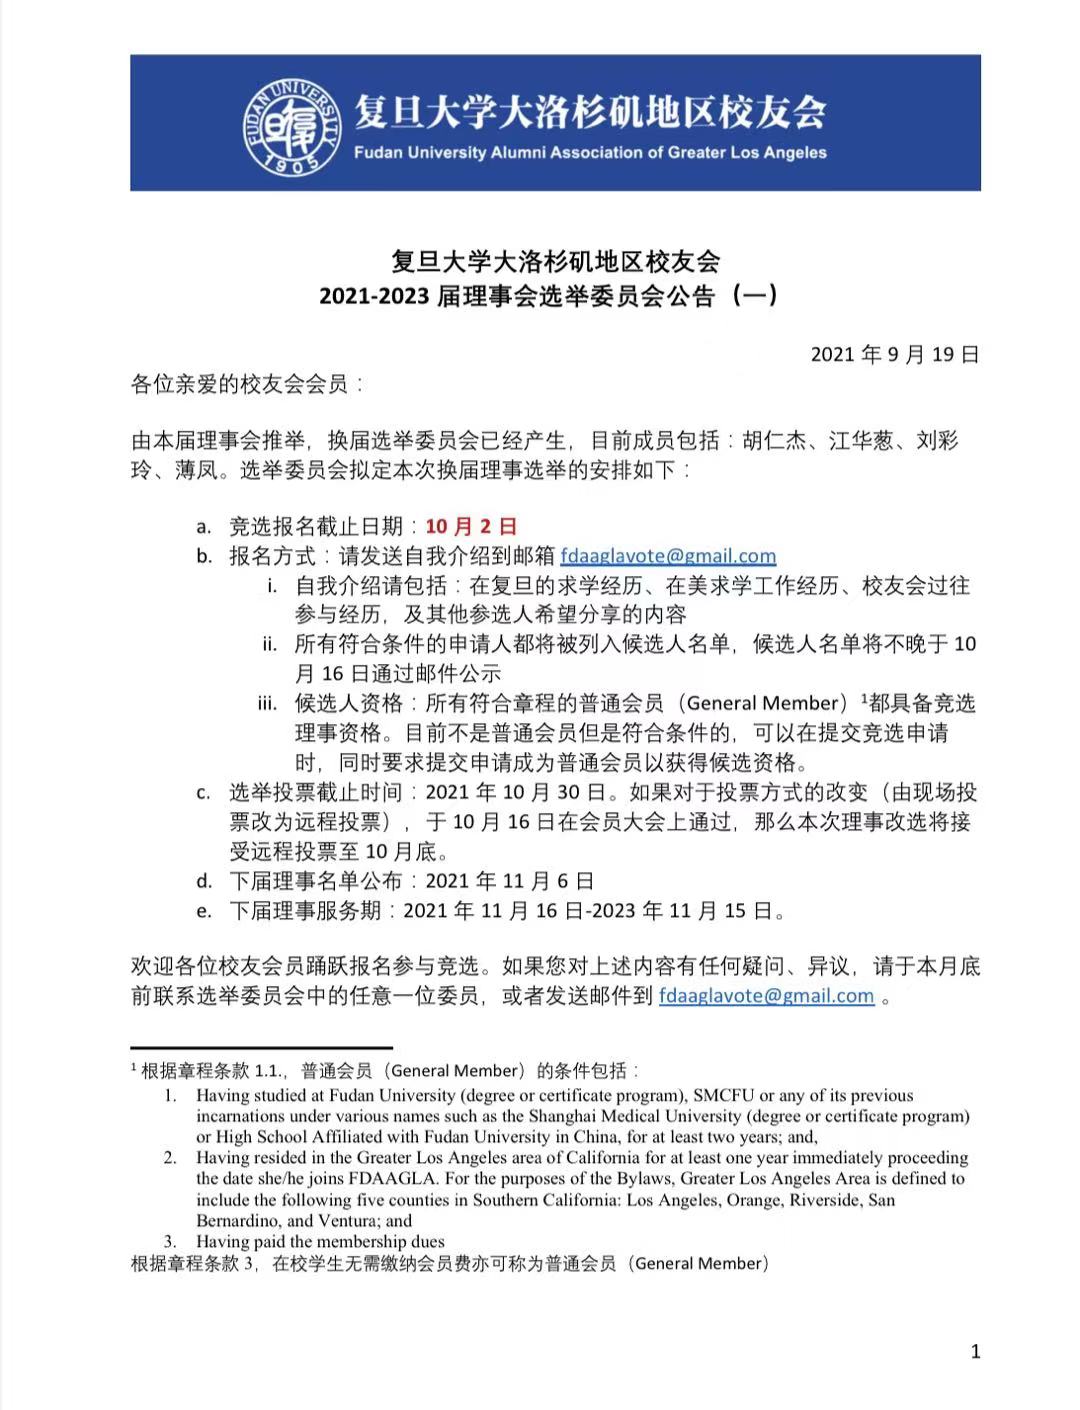 A chinese language document with instructions for the use of an electronic device.